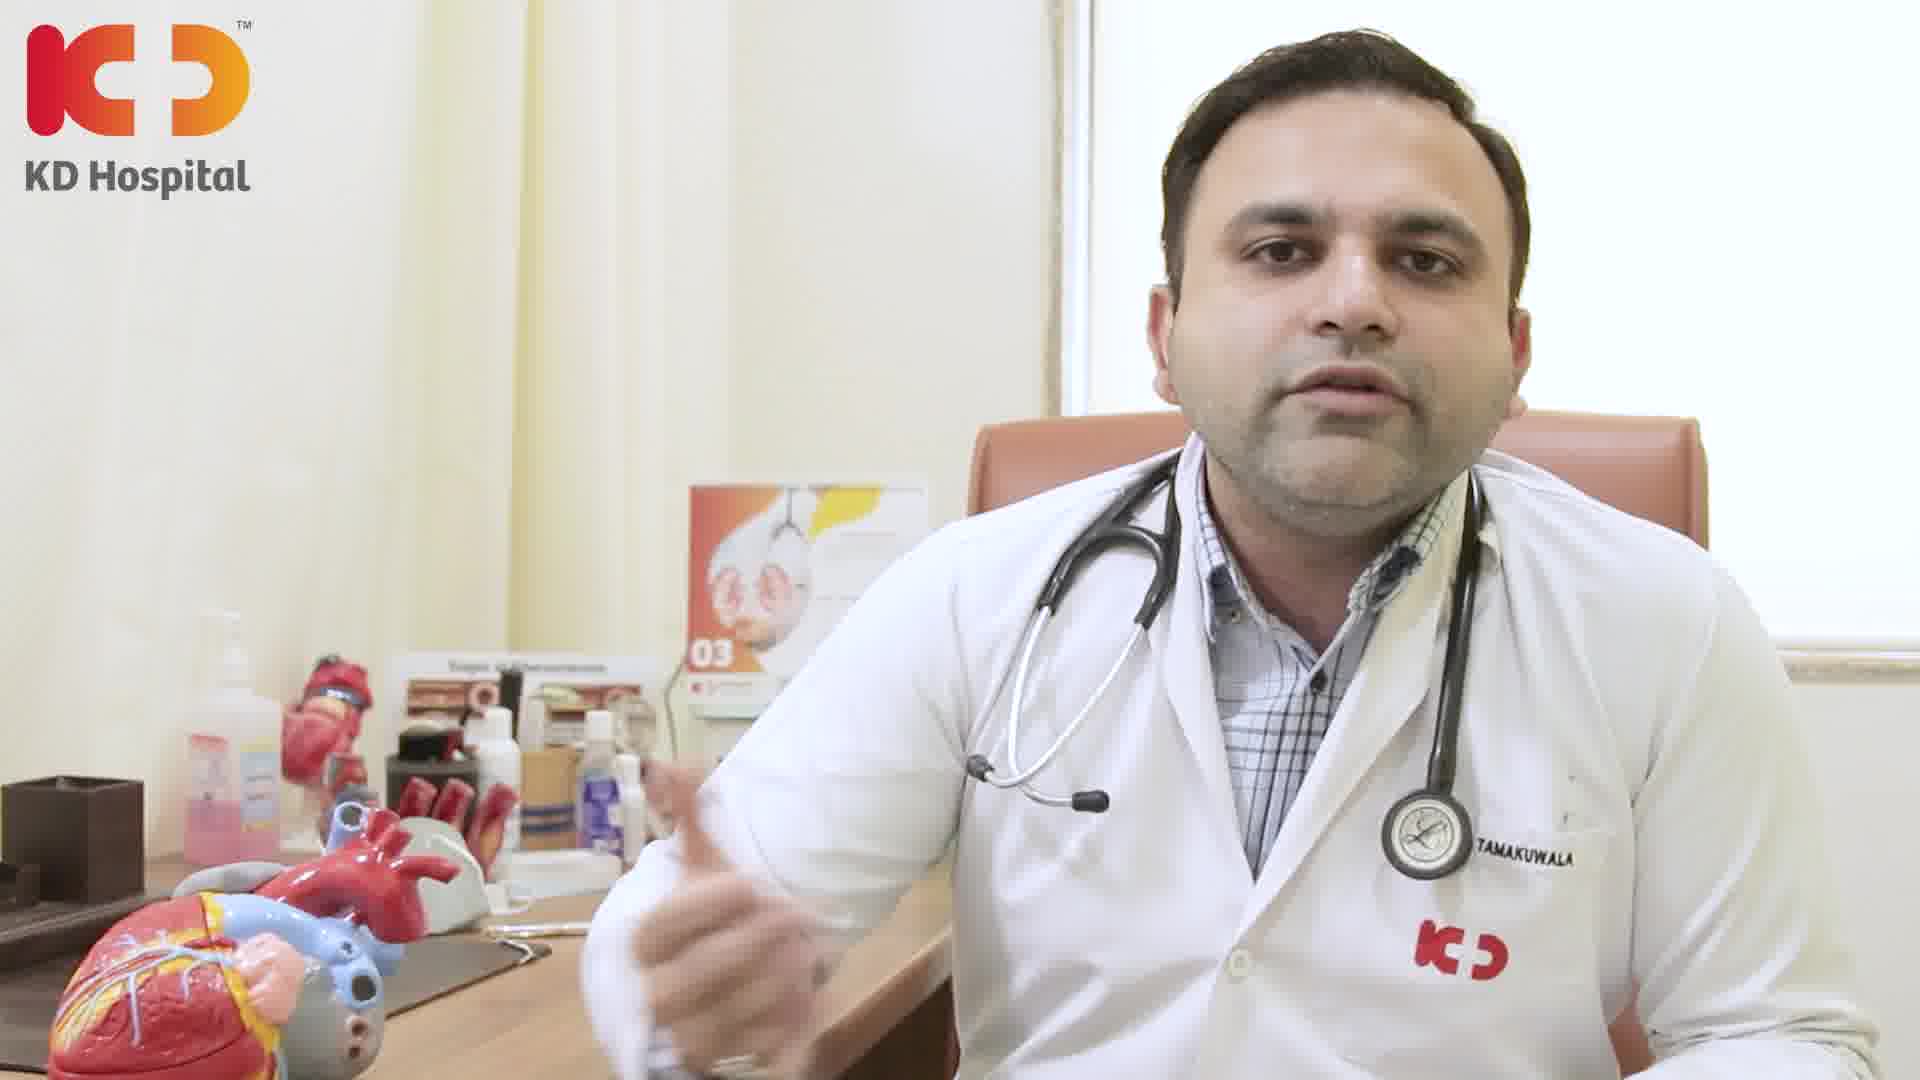 Let's Hear Our Cardiology Patient Mr. Sandeep's experience at KD Hospital.

Mr. Sandeep Mishra admitted under Dr Krunal Tamakuwala MD, DM Cardiologist at KD Hospital  share his journey for his heart treatment.

Dr. Krunal Tamakuwala
#KDHospital #CardiacFailure #HeartFailureSurvivor #HeartFailureFight #HealthyHeart #Awareness #goodhealth #wellness #wellnessthatworks #Ahmedabad #Gujarat #India